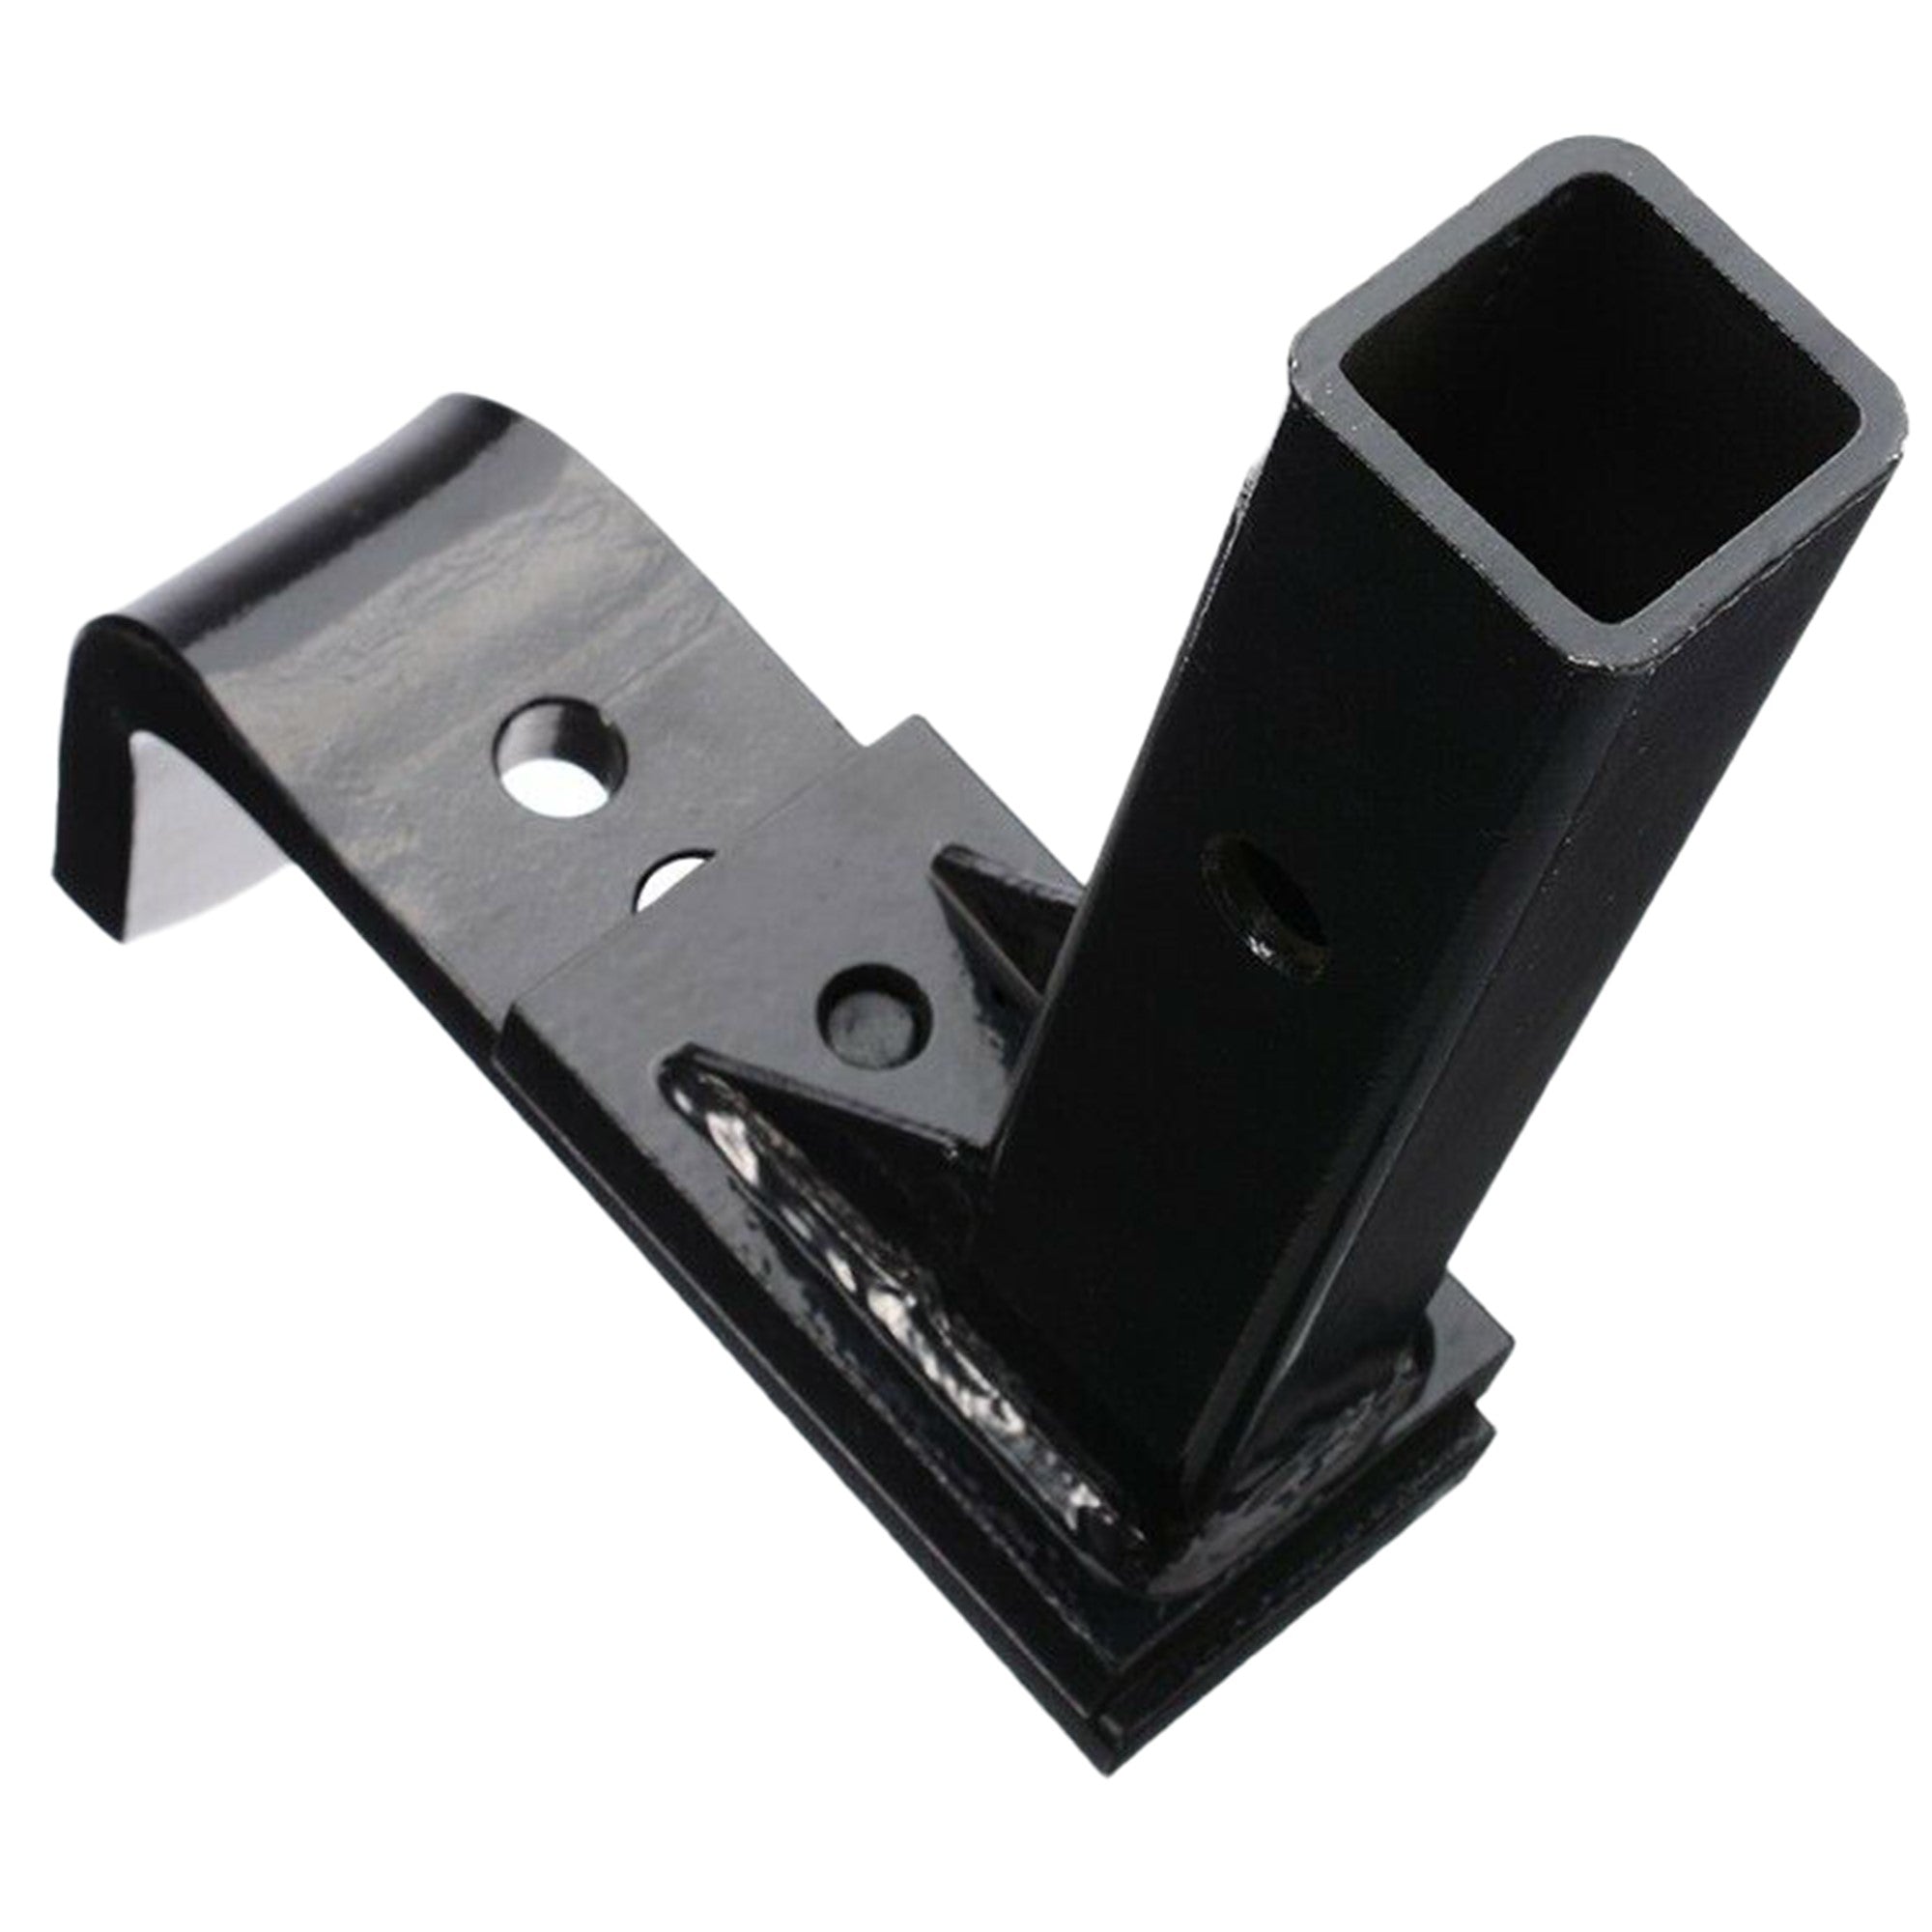 Versatile usage comes with a 2-inch x 2-inch shank to fit virtually any industry-standard 2-inch receiver